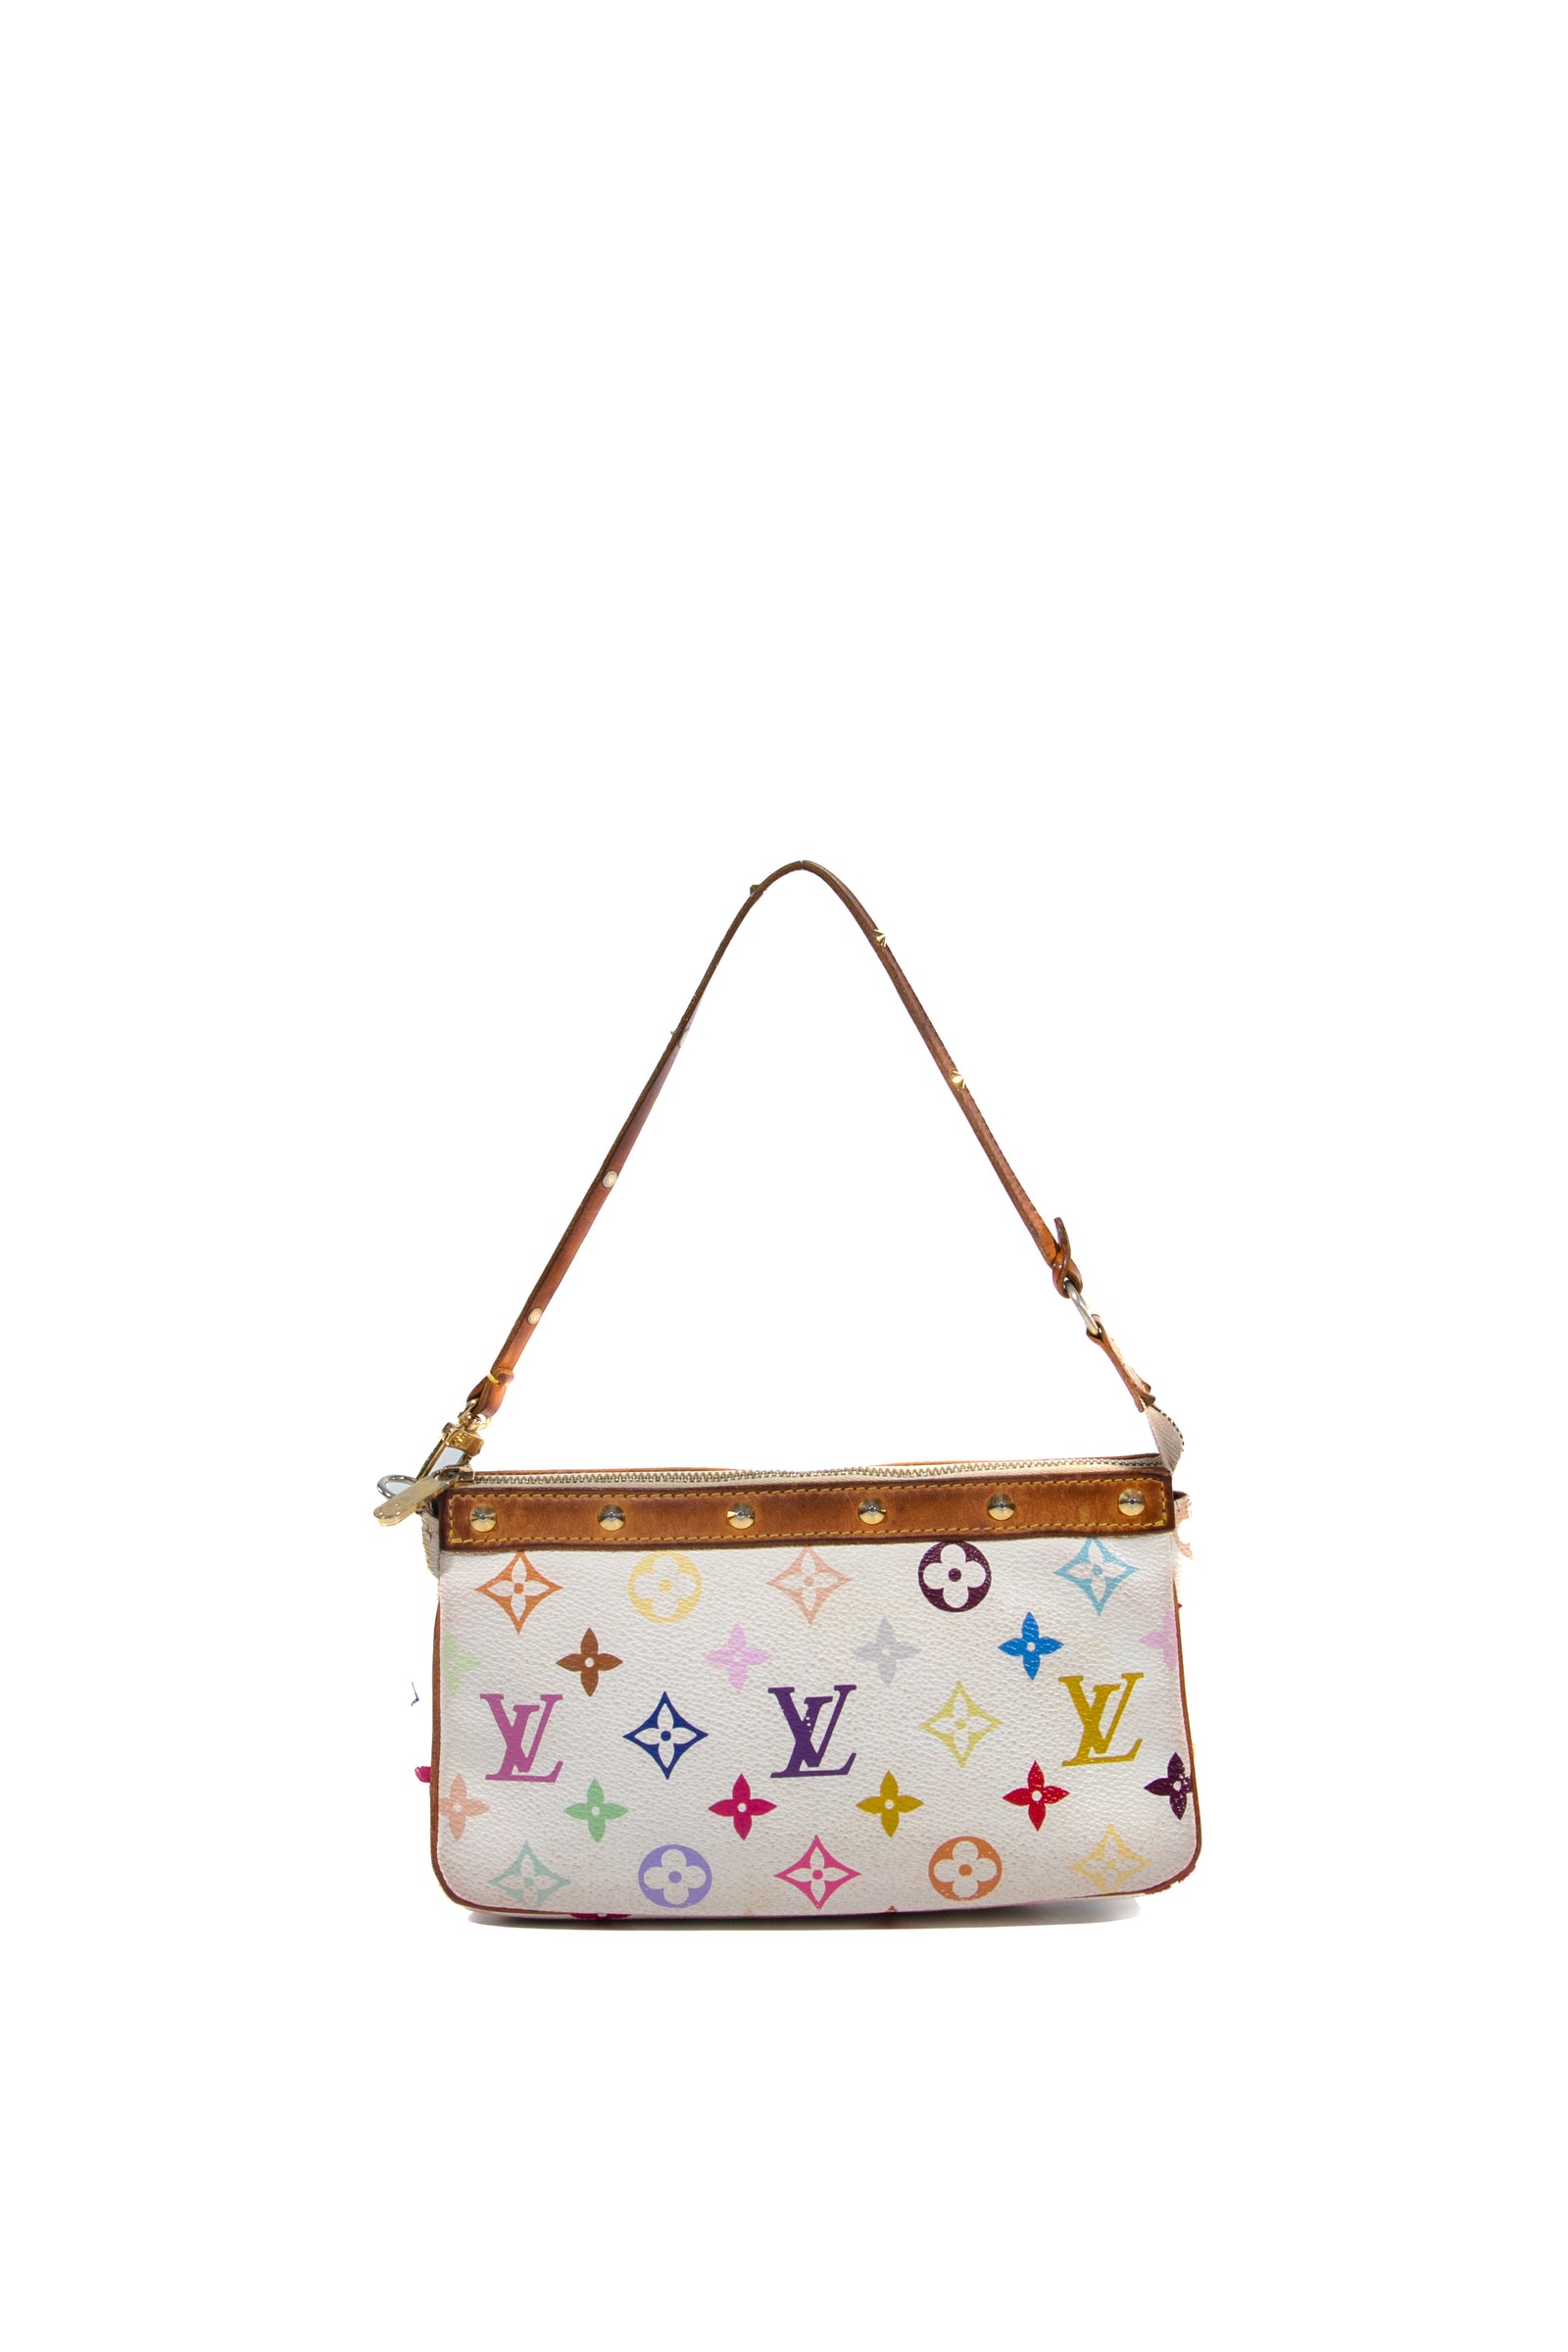 Louis Vuitton Exotic Bags Reference Guide - Spotted Fashion